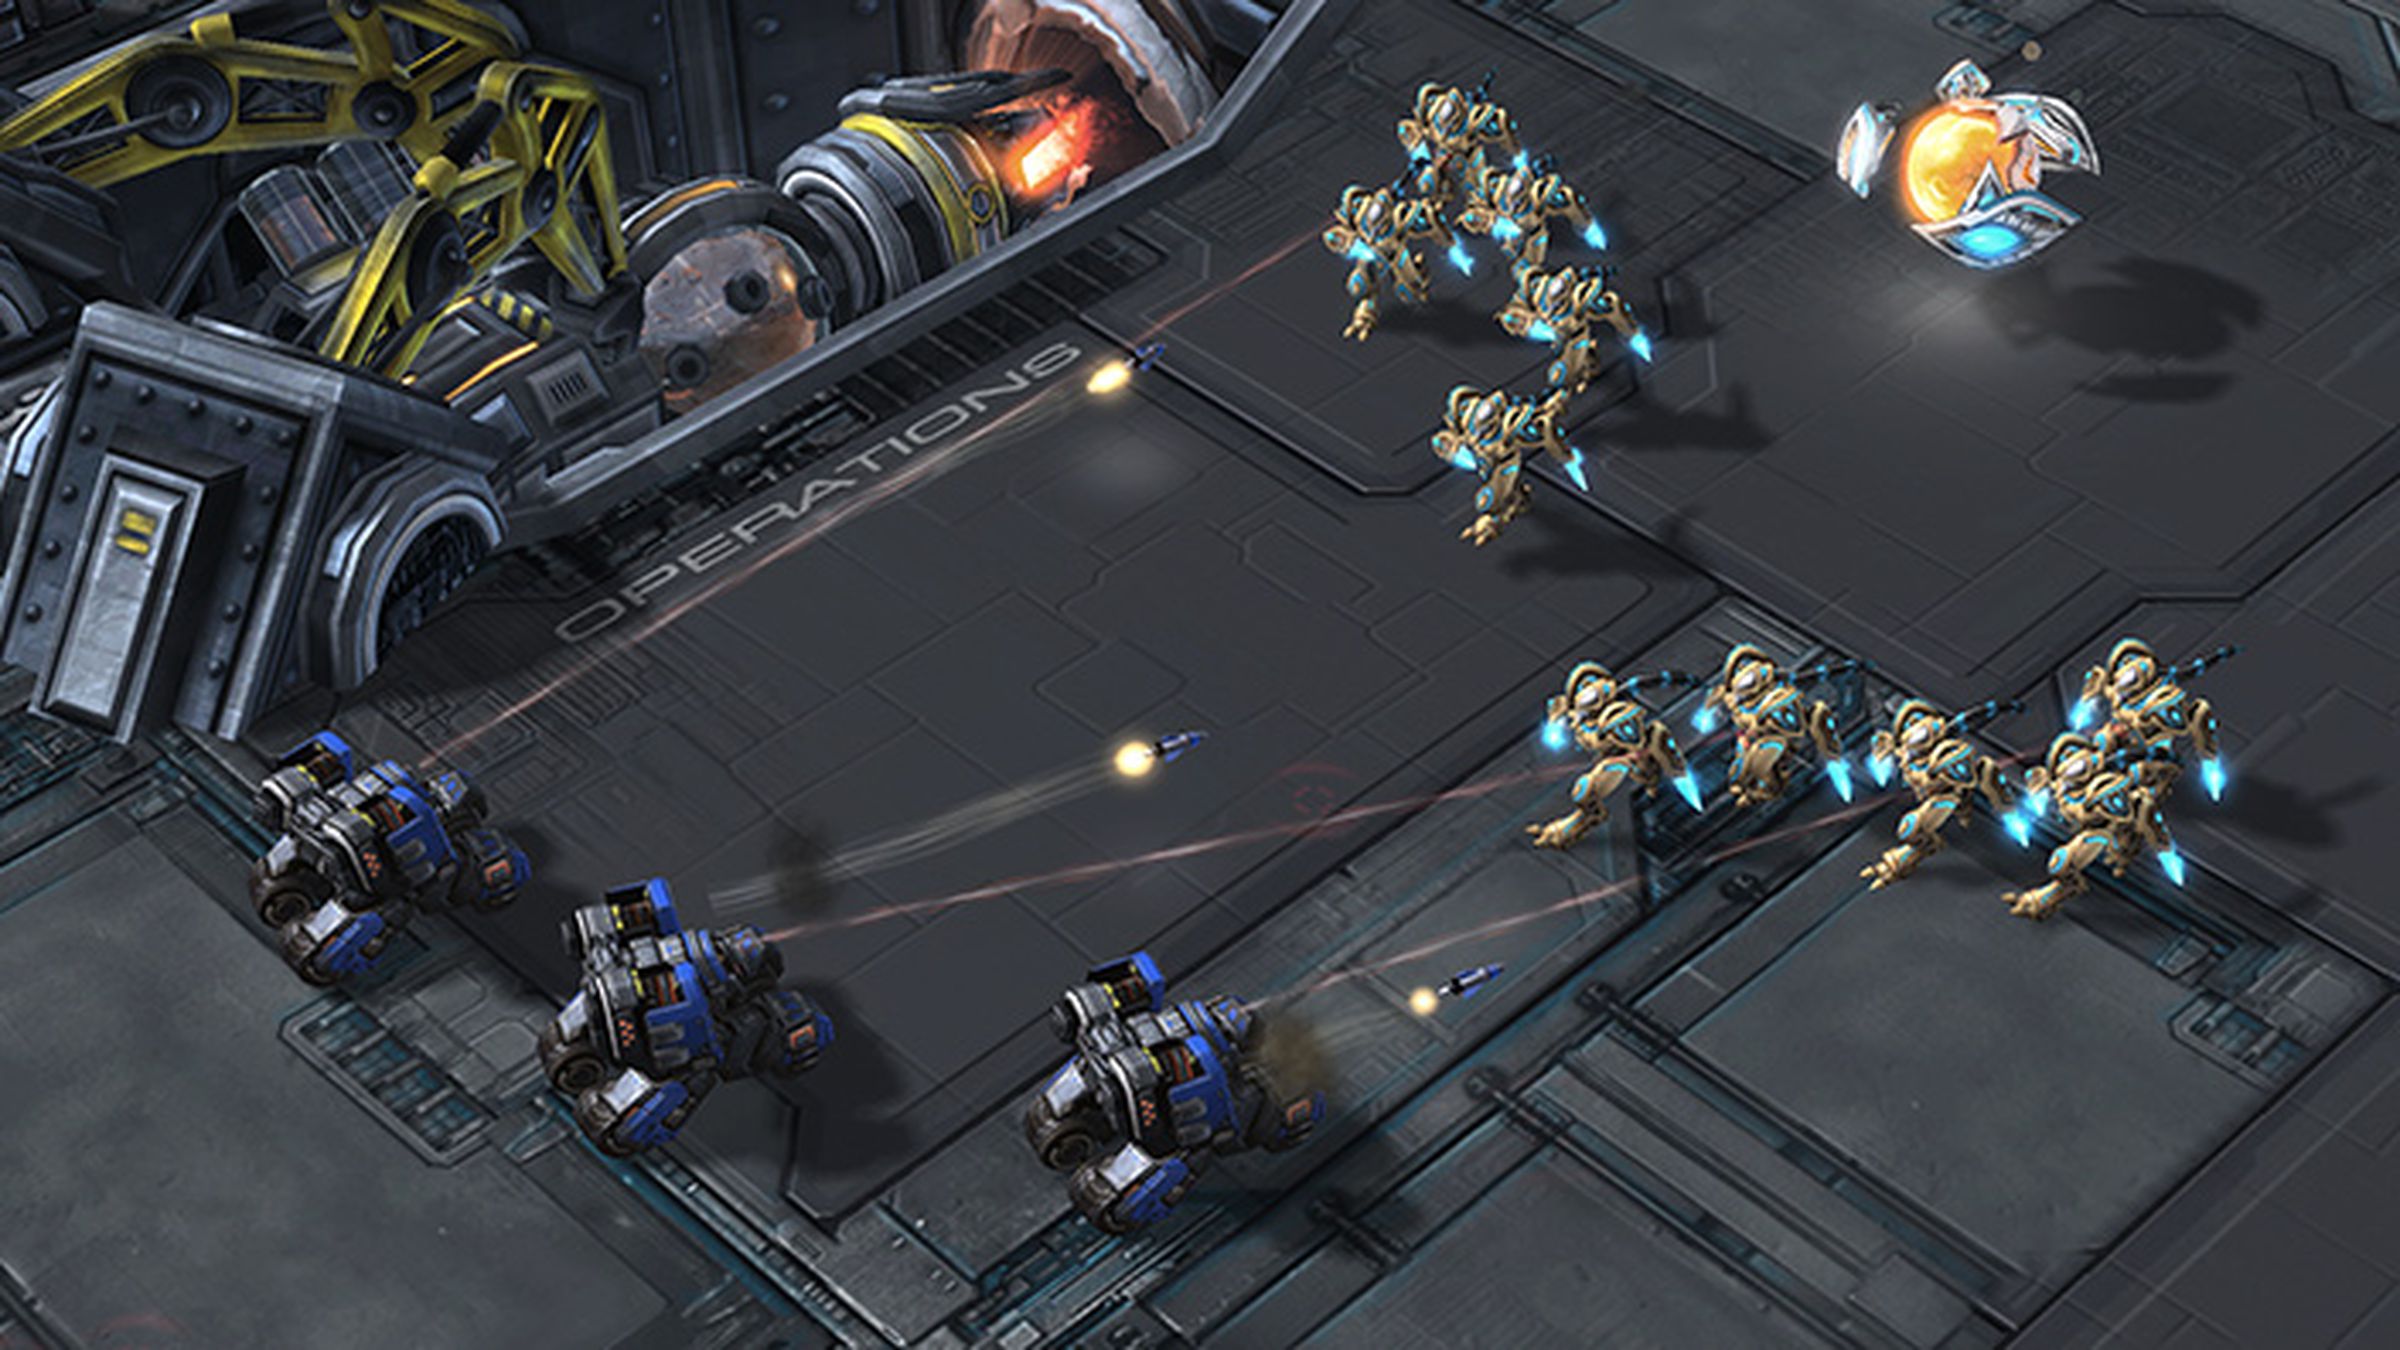 In Starcraft II, players have to collect resources, explore territory, and build bases to defeat their opponent.